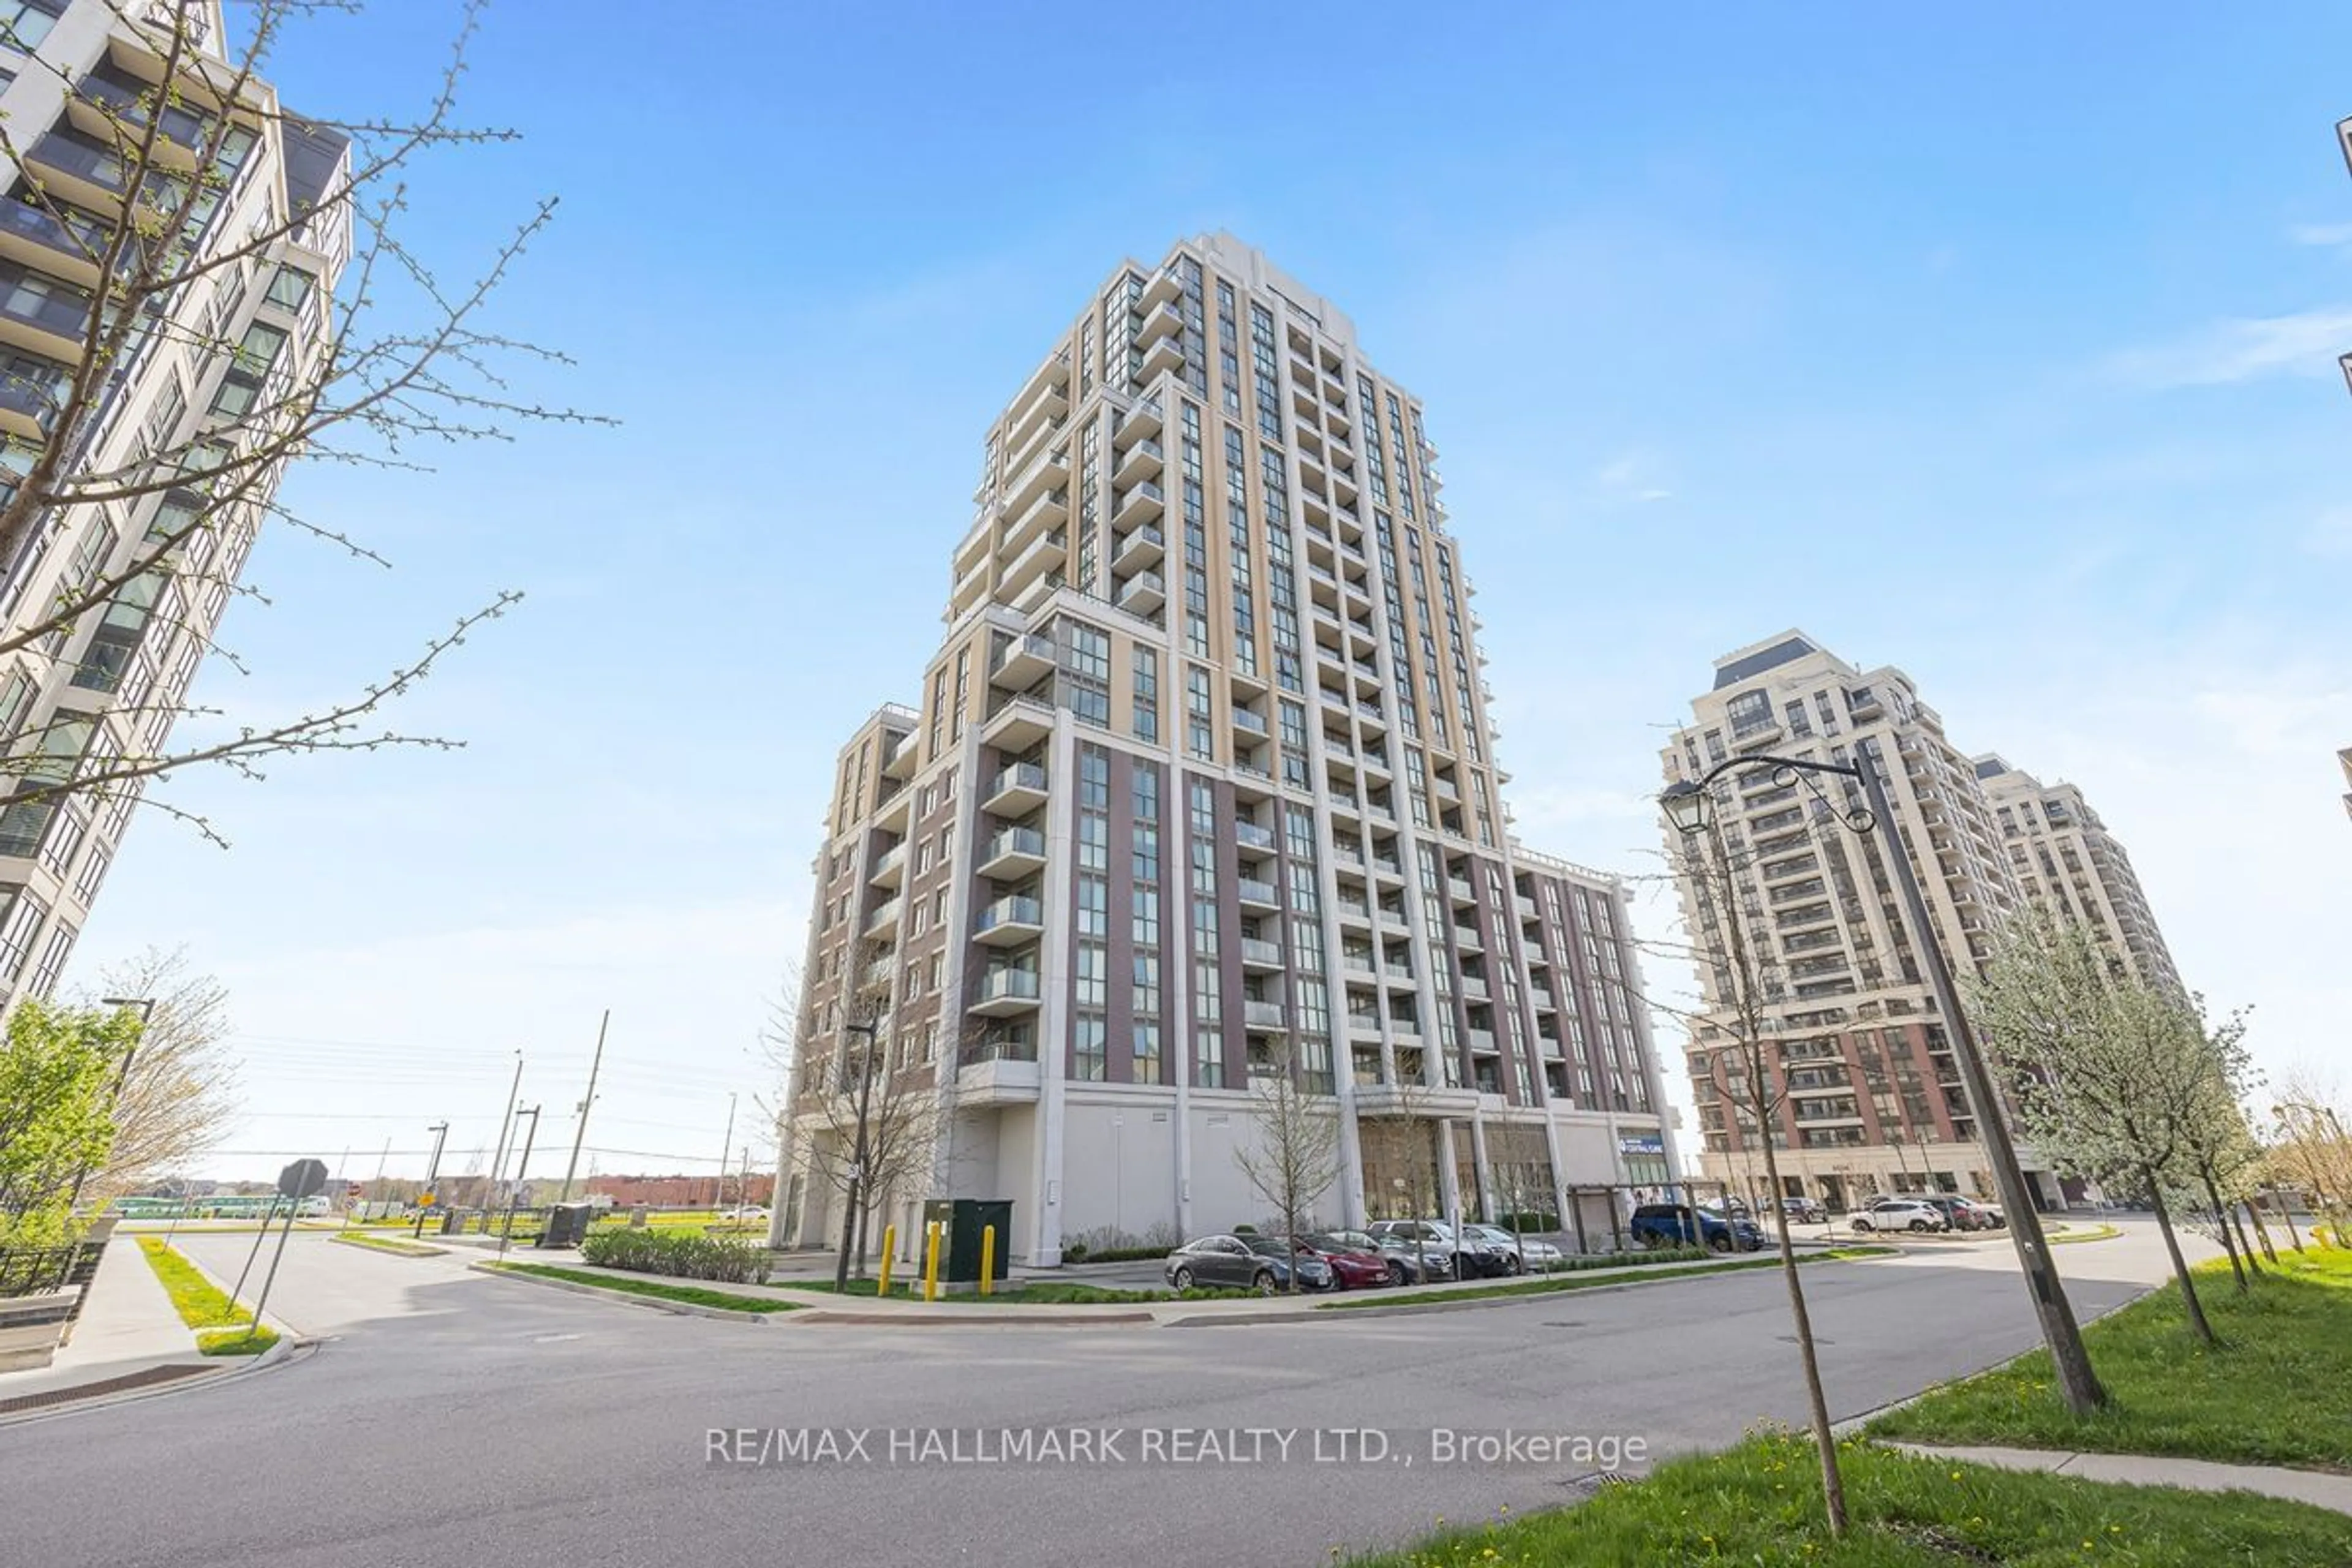 A pic from exterior of the house or condo for 9560 Markham Rd #206, Markham Ontario L6E 0T9